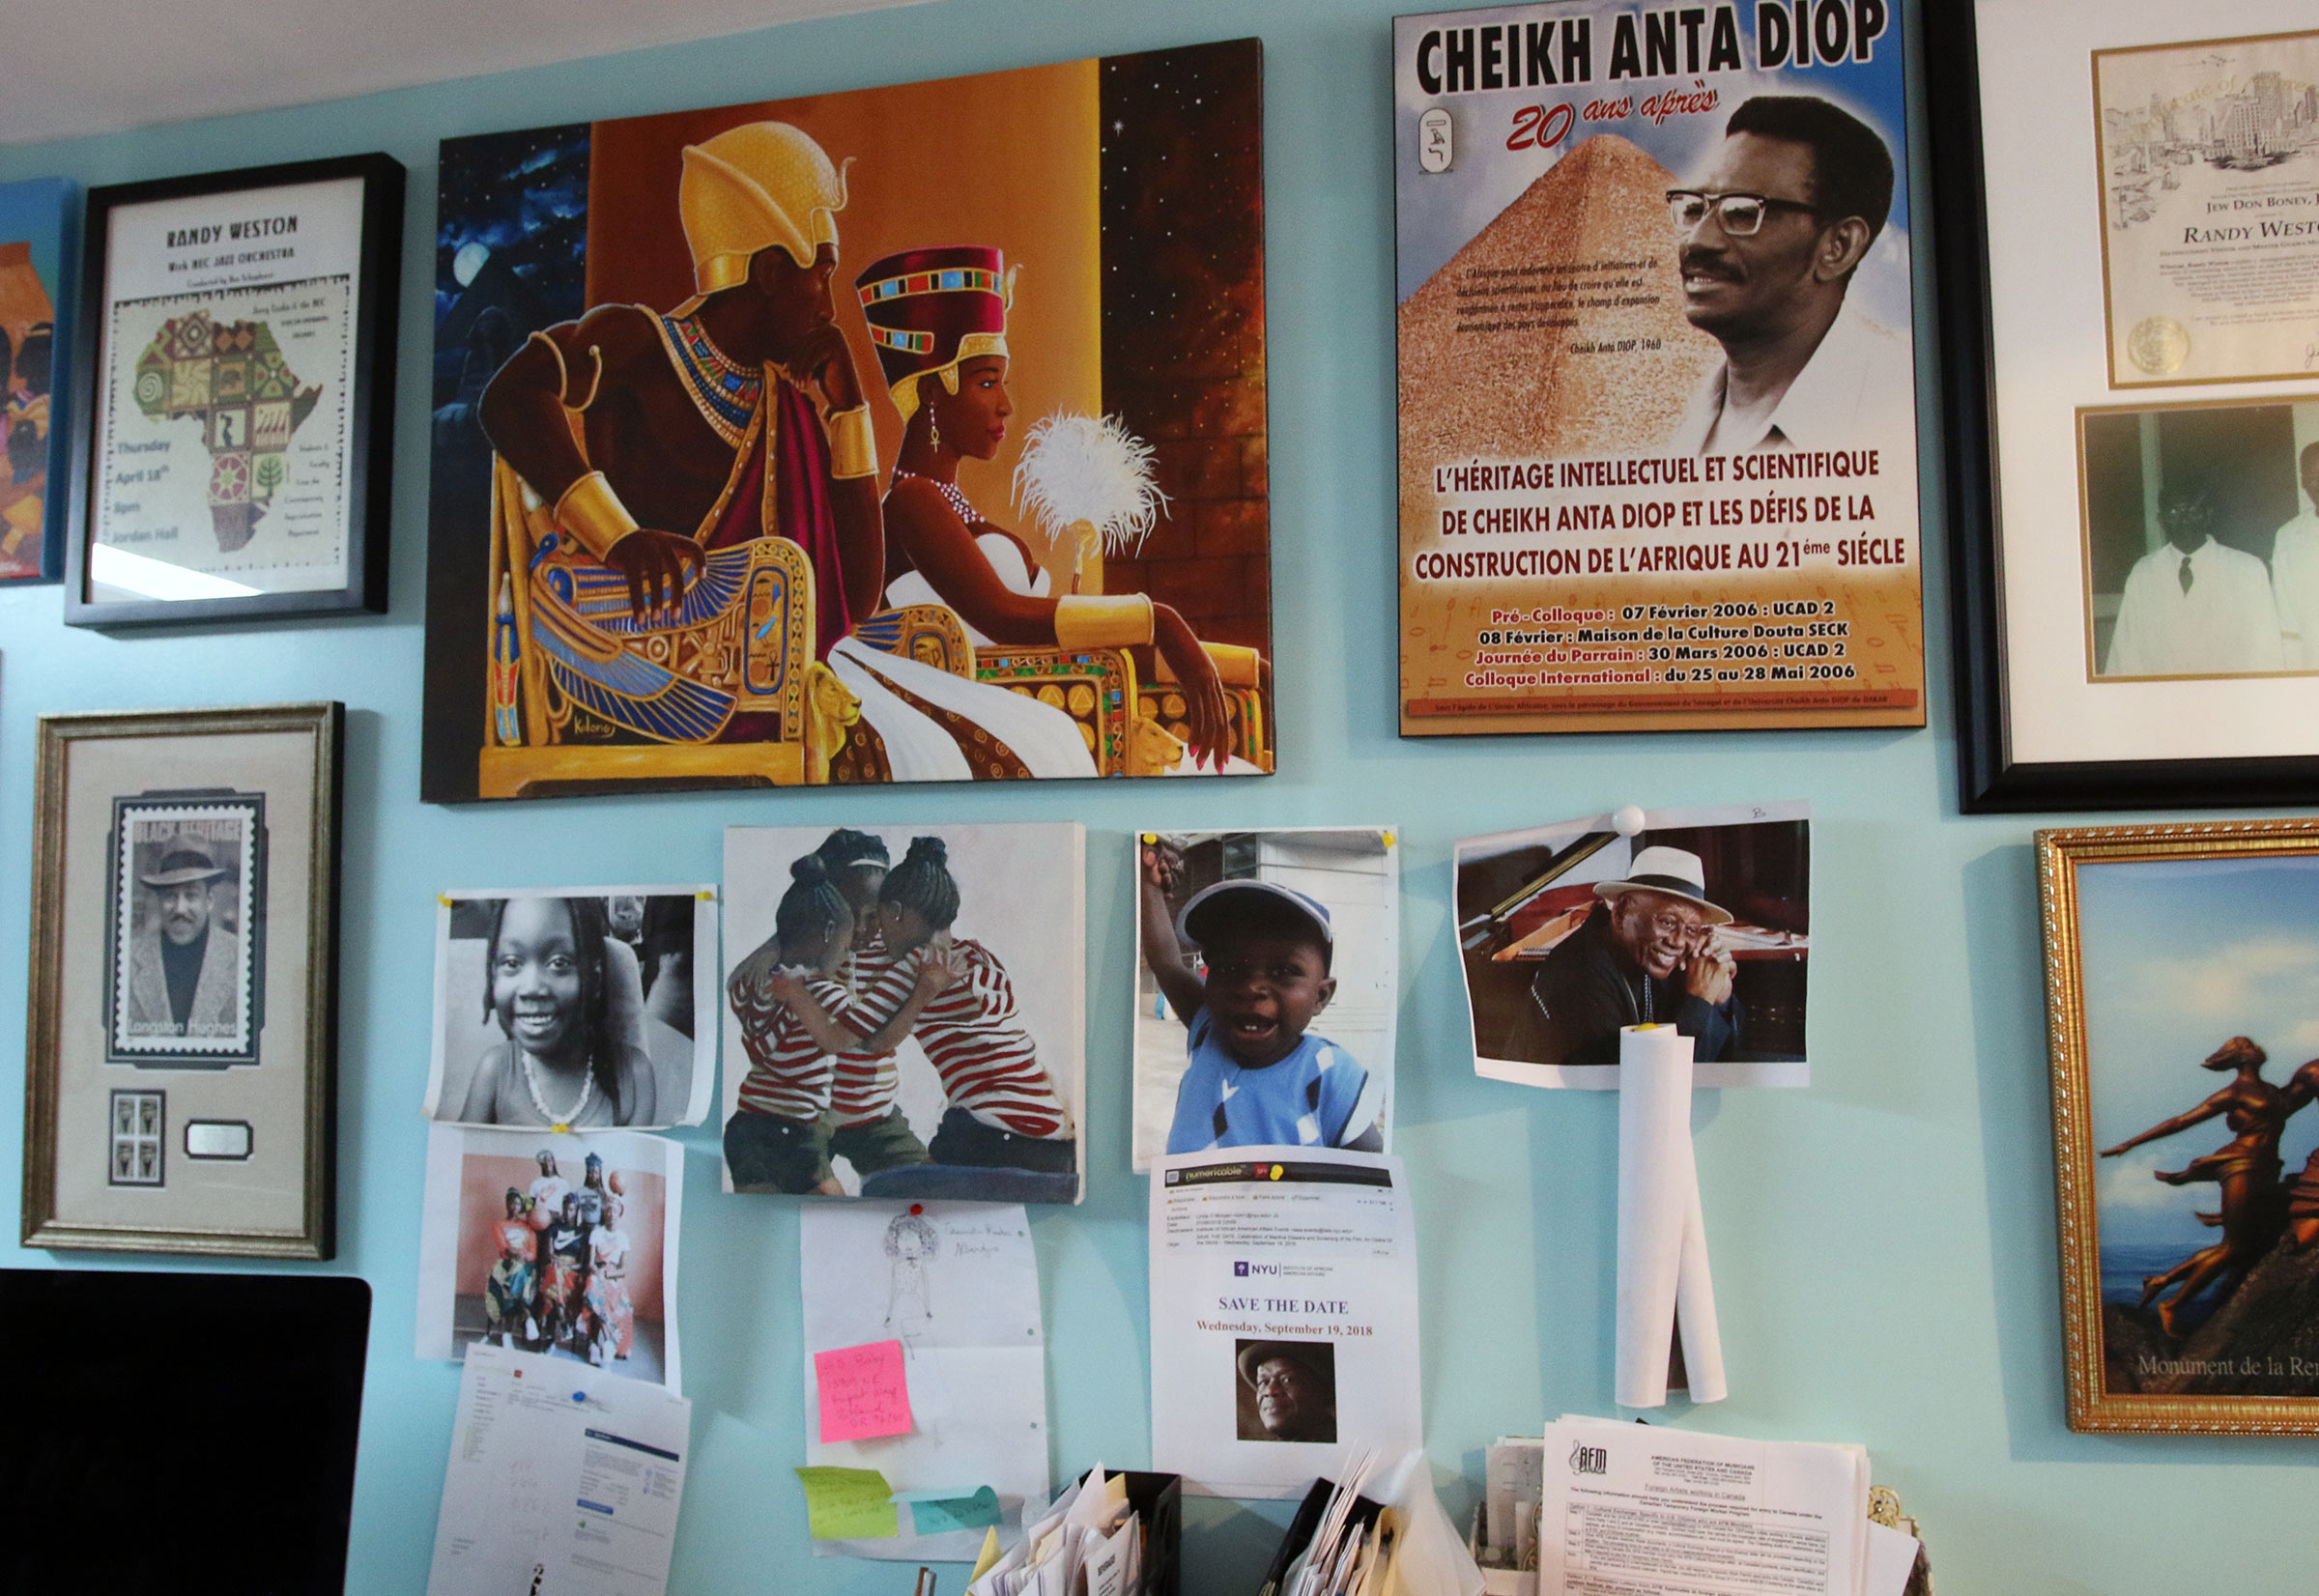 One of the walls in Randy Weston's home which is full of posters and photographs of various African people.